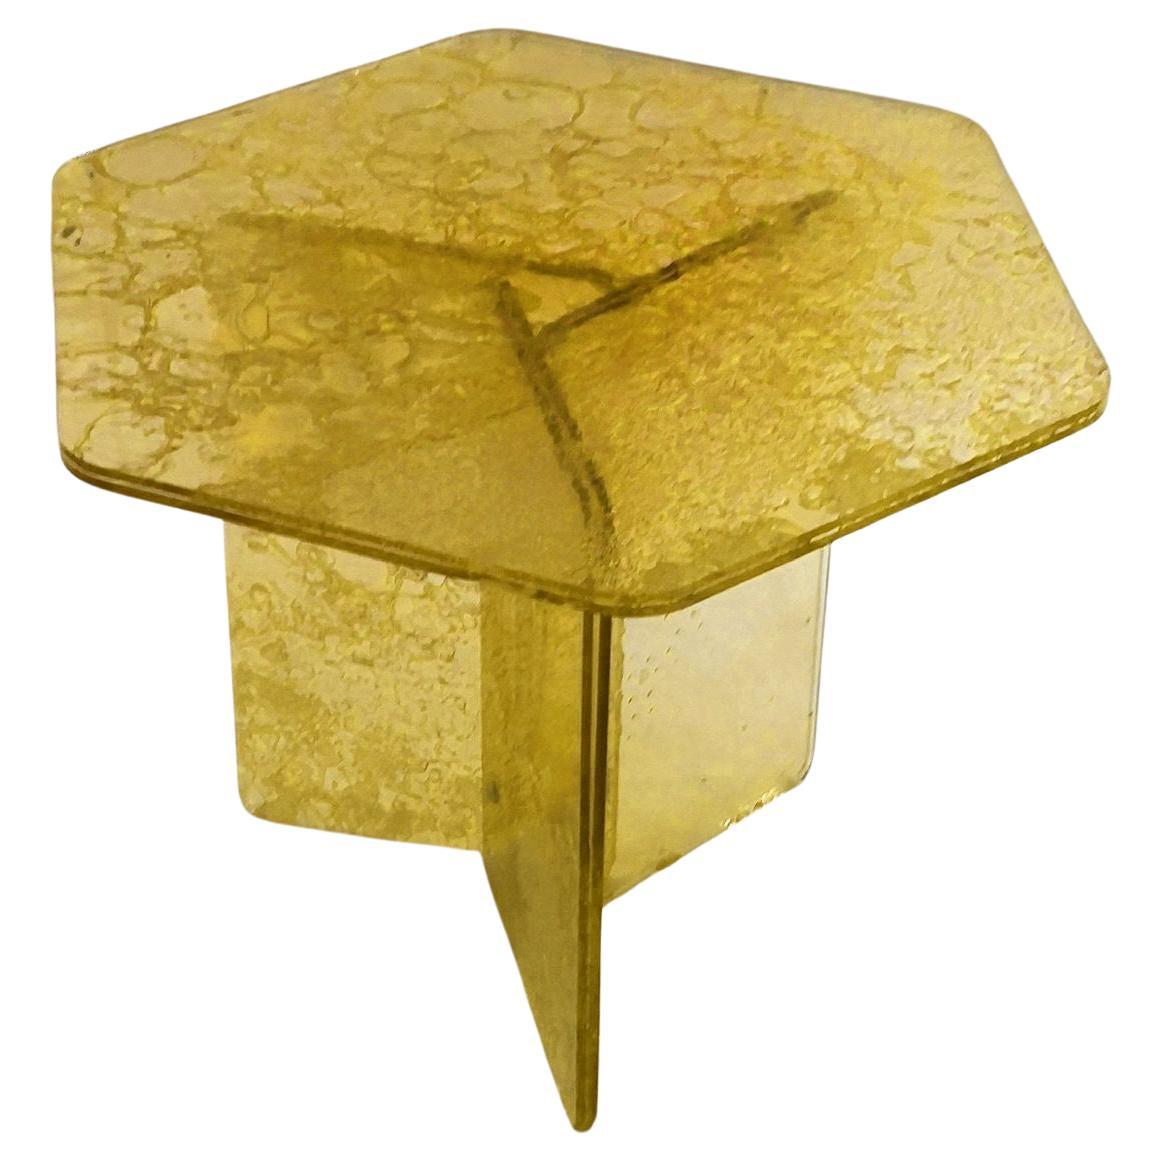 Sketch Hexagon Sidetable Made of Yellow Acrylic Des, Roberto Giacomucci in 2020 For Sale